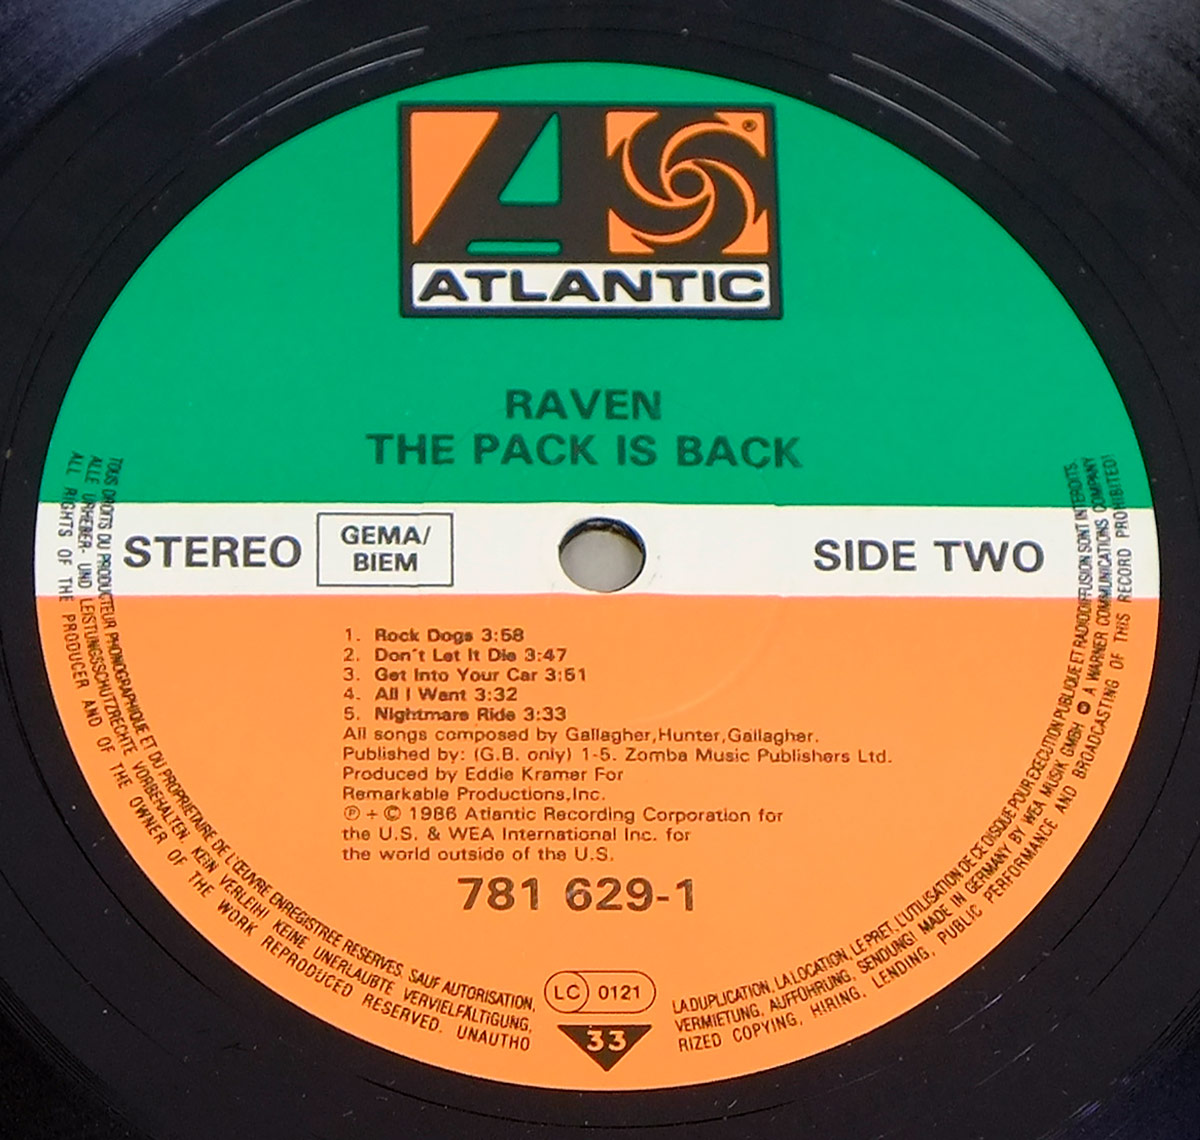 "The Pack Is Back" Green, White and Orange Colour Record Label Details: ATLANTIC 781 629